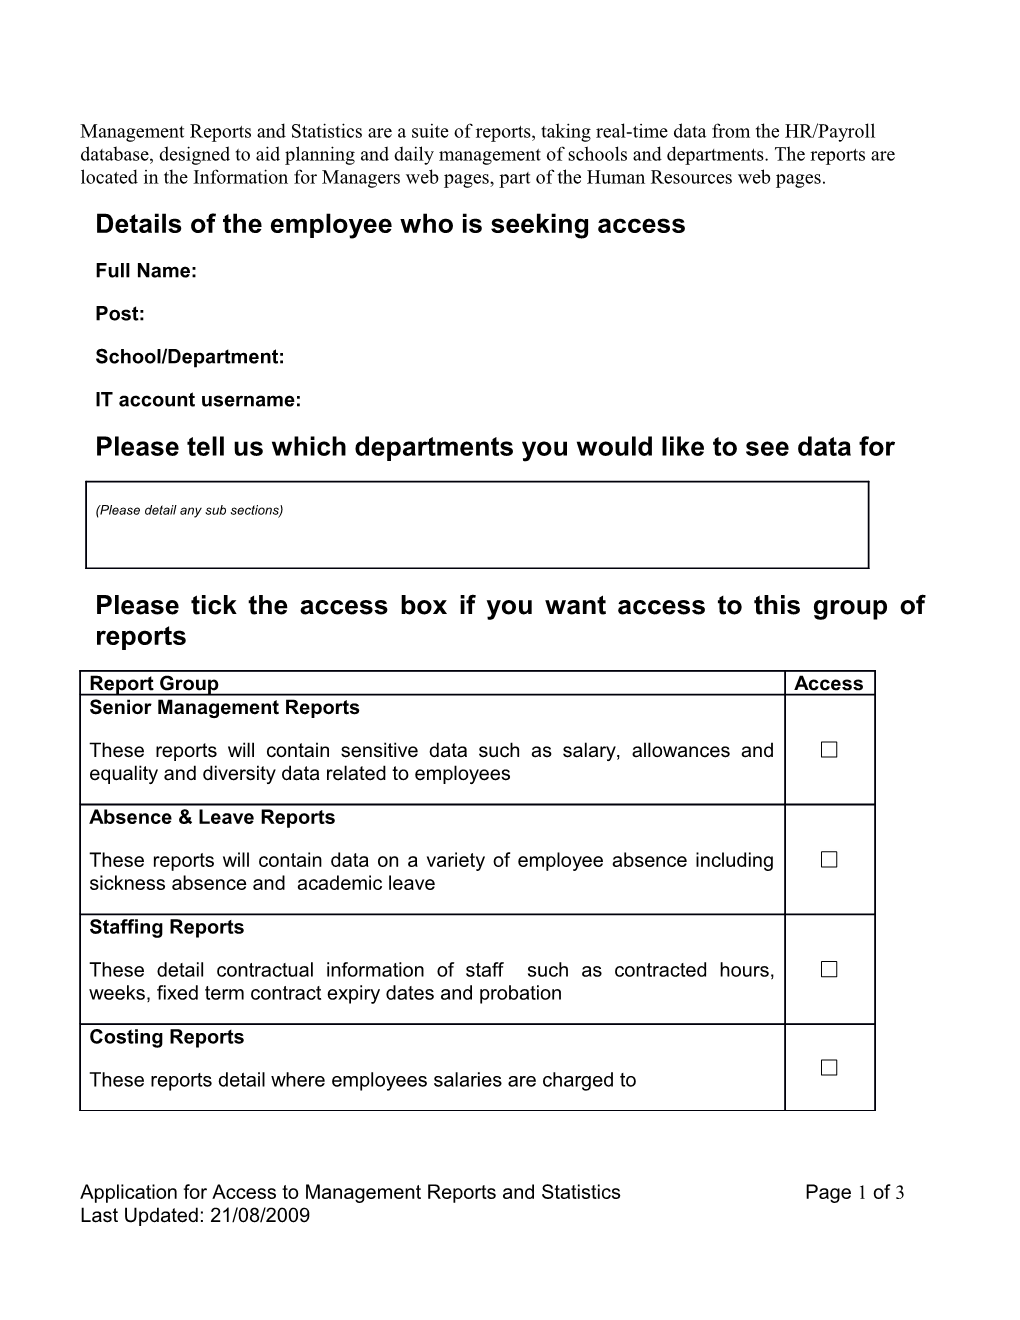 Details of the Employee Who Is Seeking Access